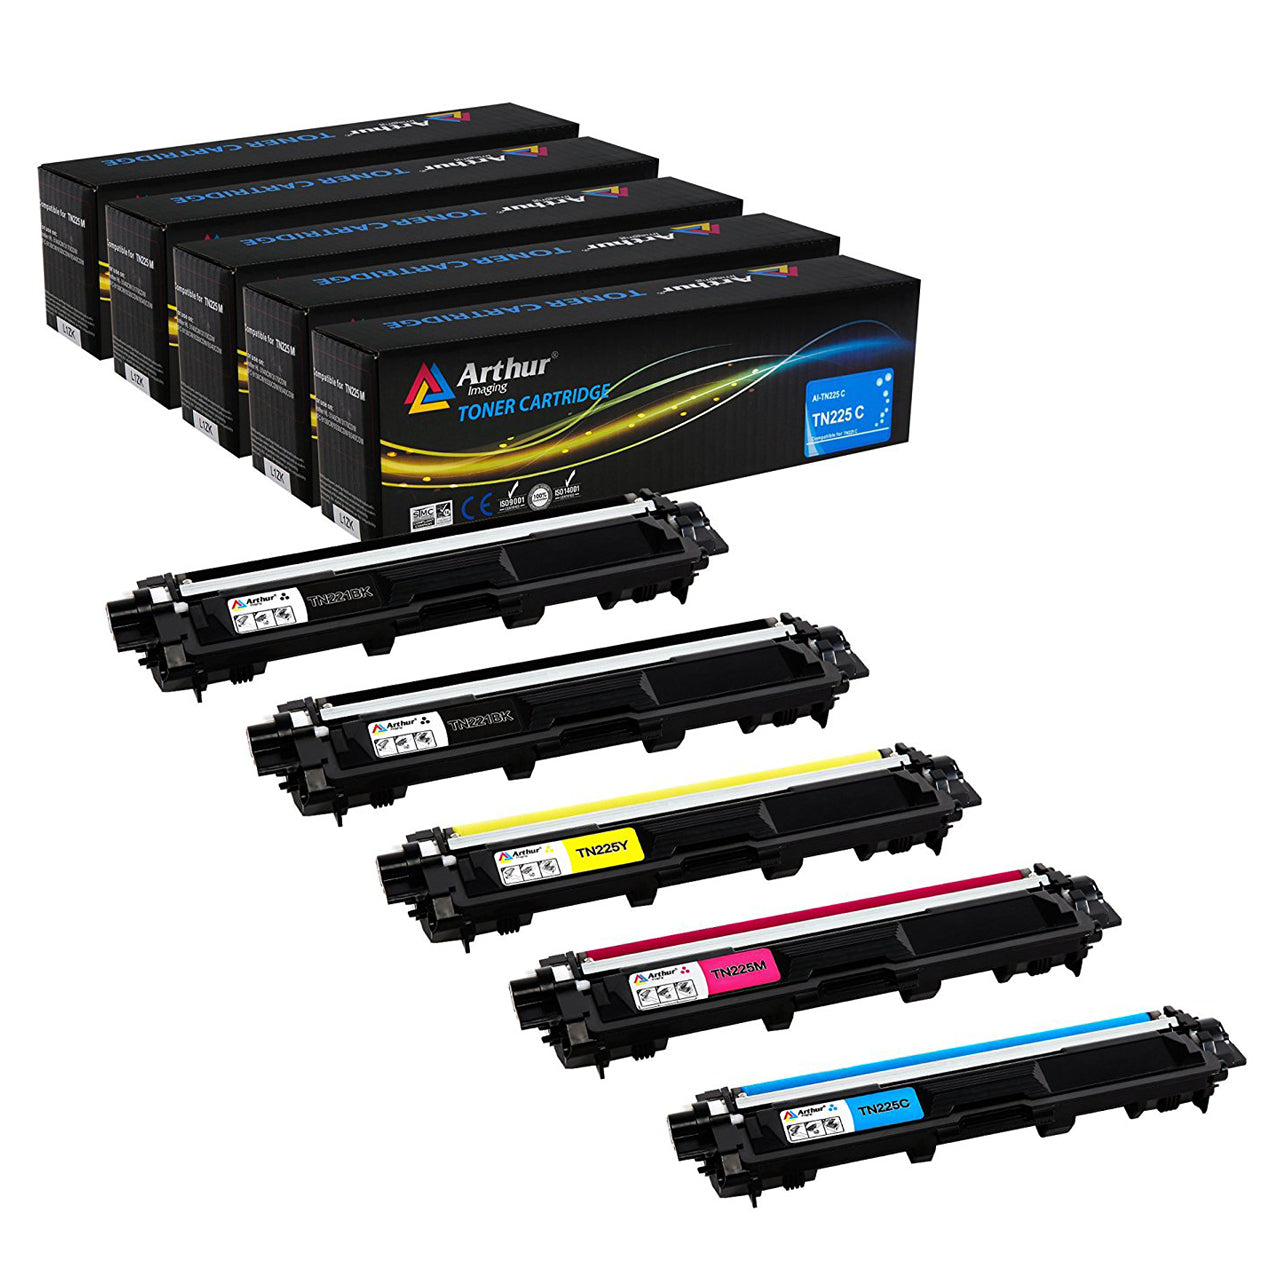 Arthur Imaging with CHIP Compatible Toner Cartridge Replacement For Brother  TN227 TN227bk TN 227 TN223 use with HL-L3210CW HL-L3230CDW HL-L3270CDW